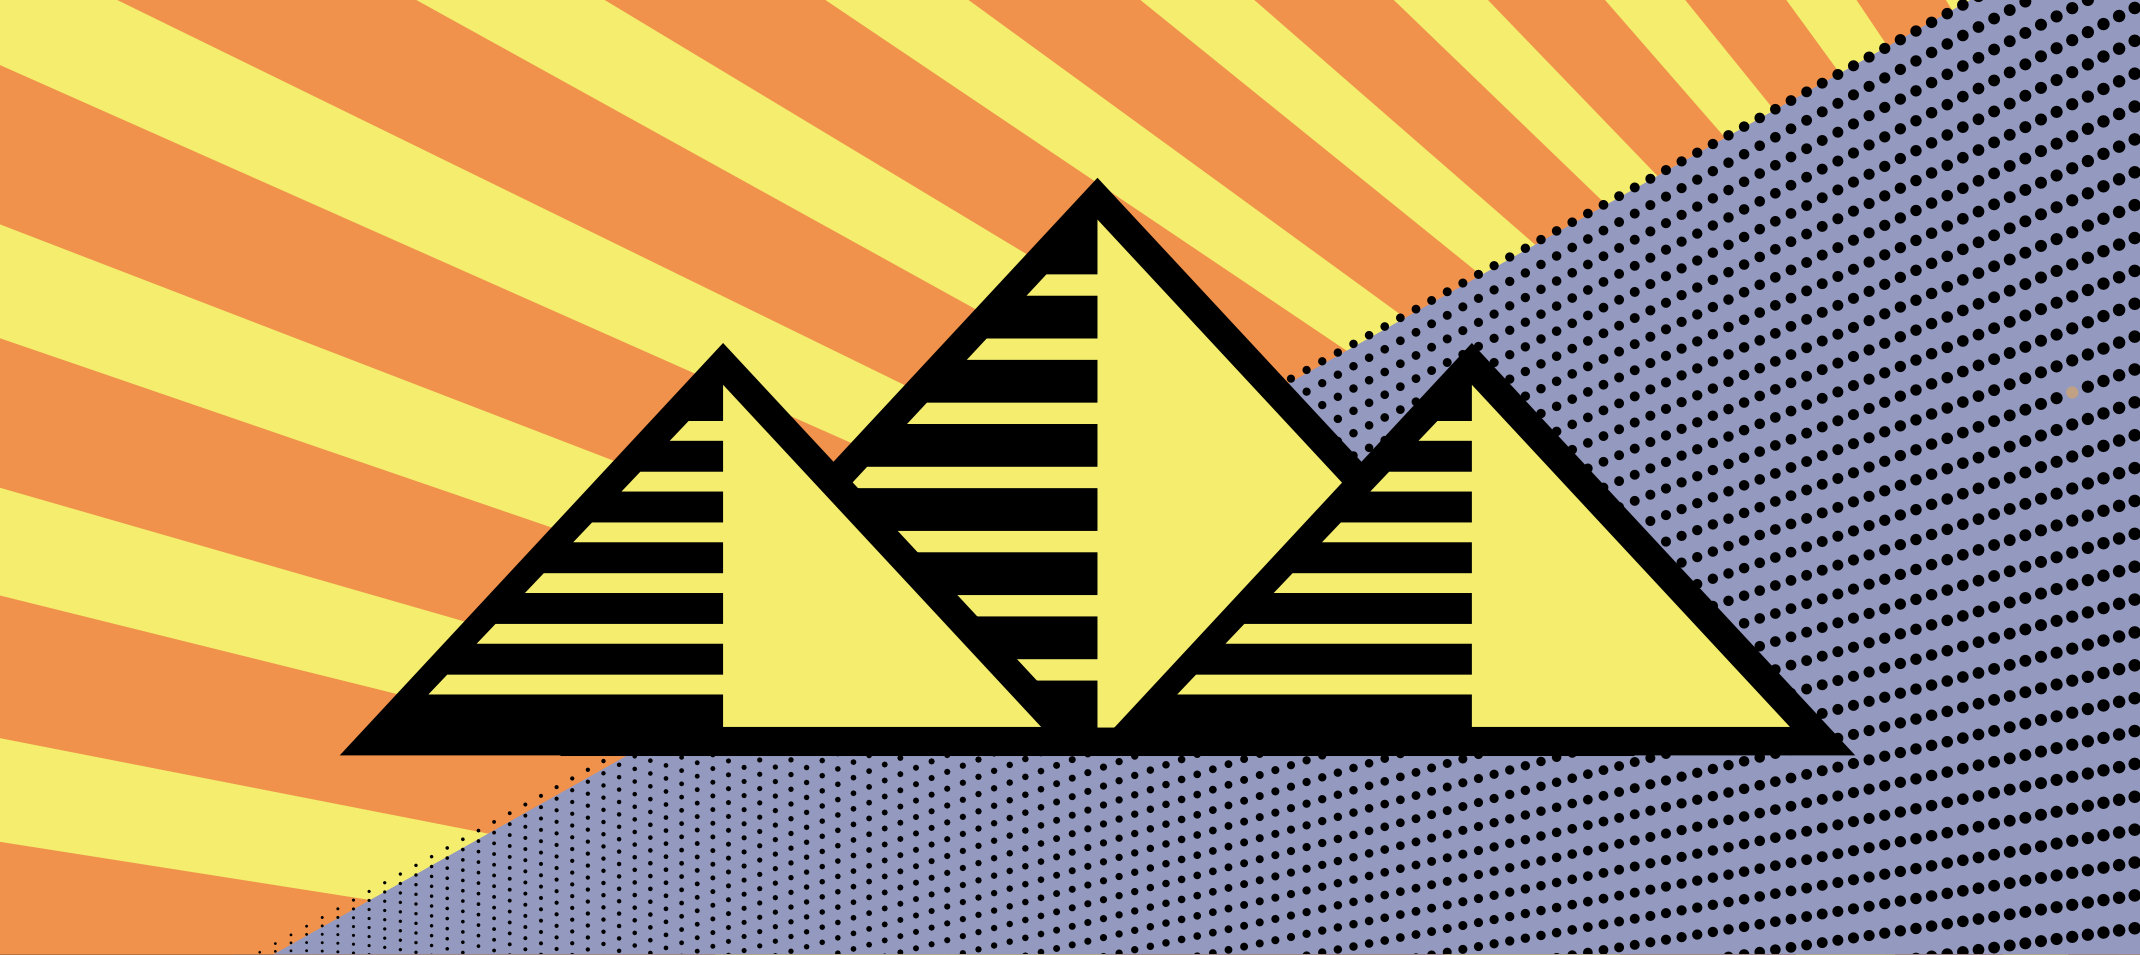 Illustration Of Pyramids On Yellow Orange And Purple Patterned Background@2x